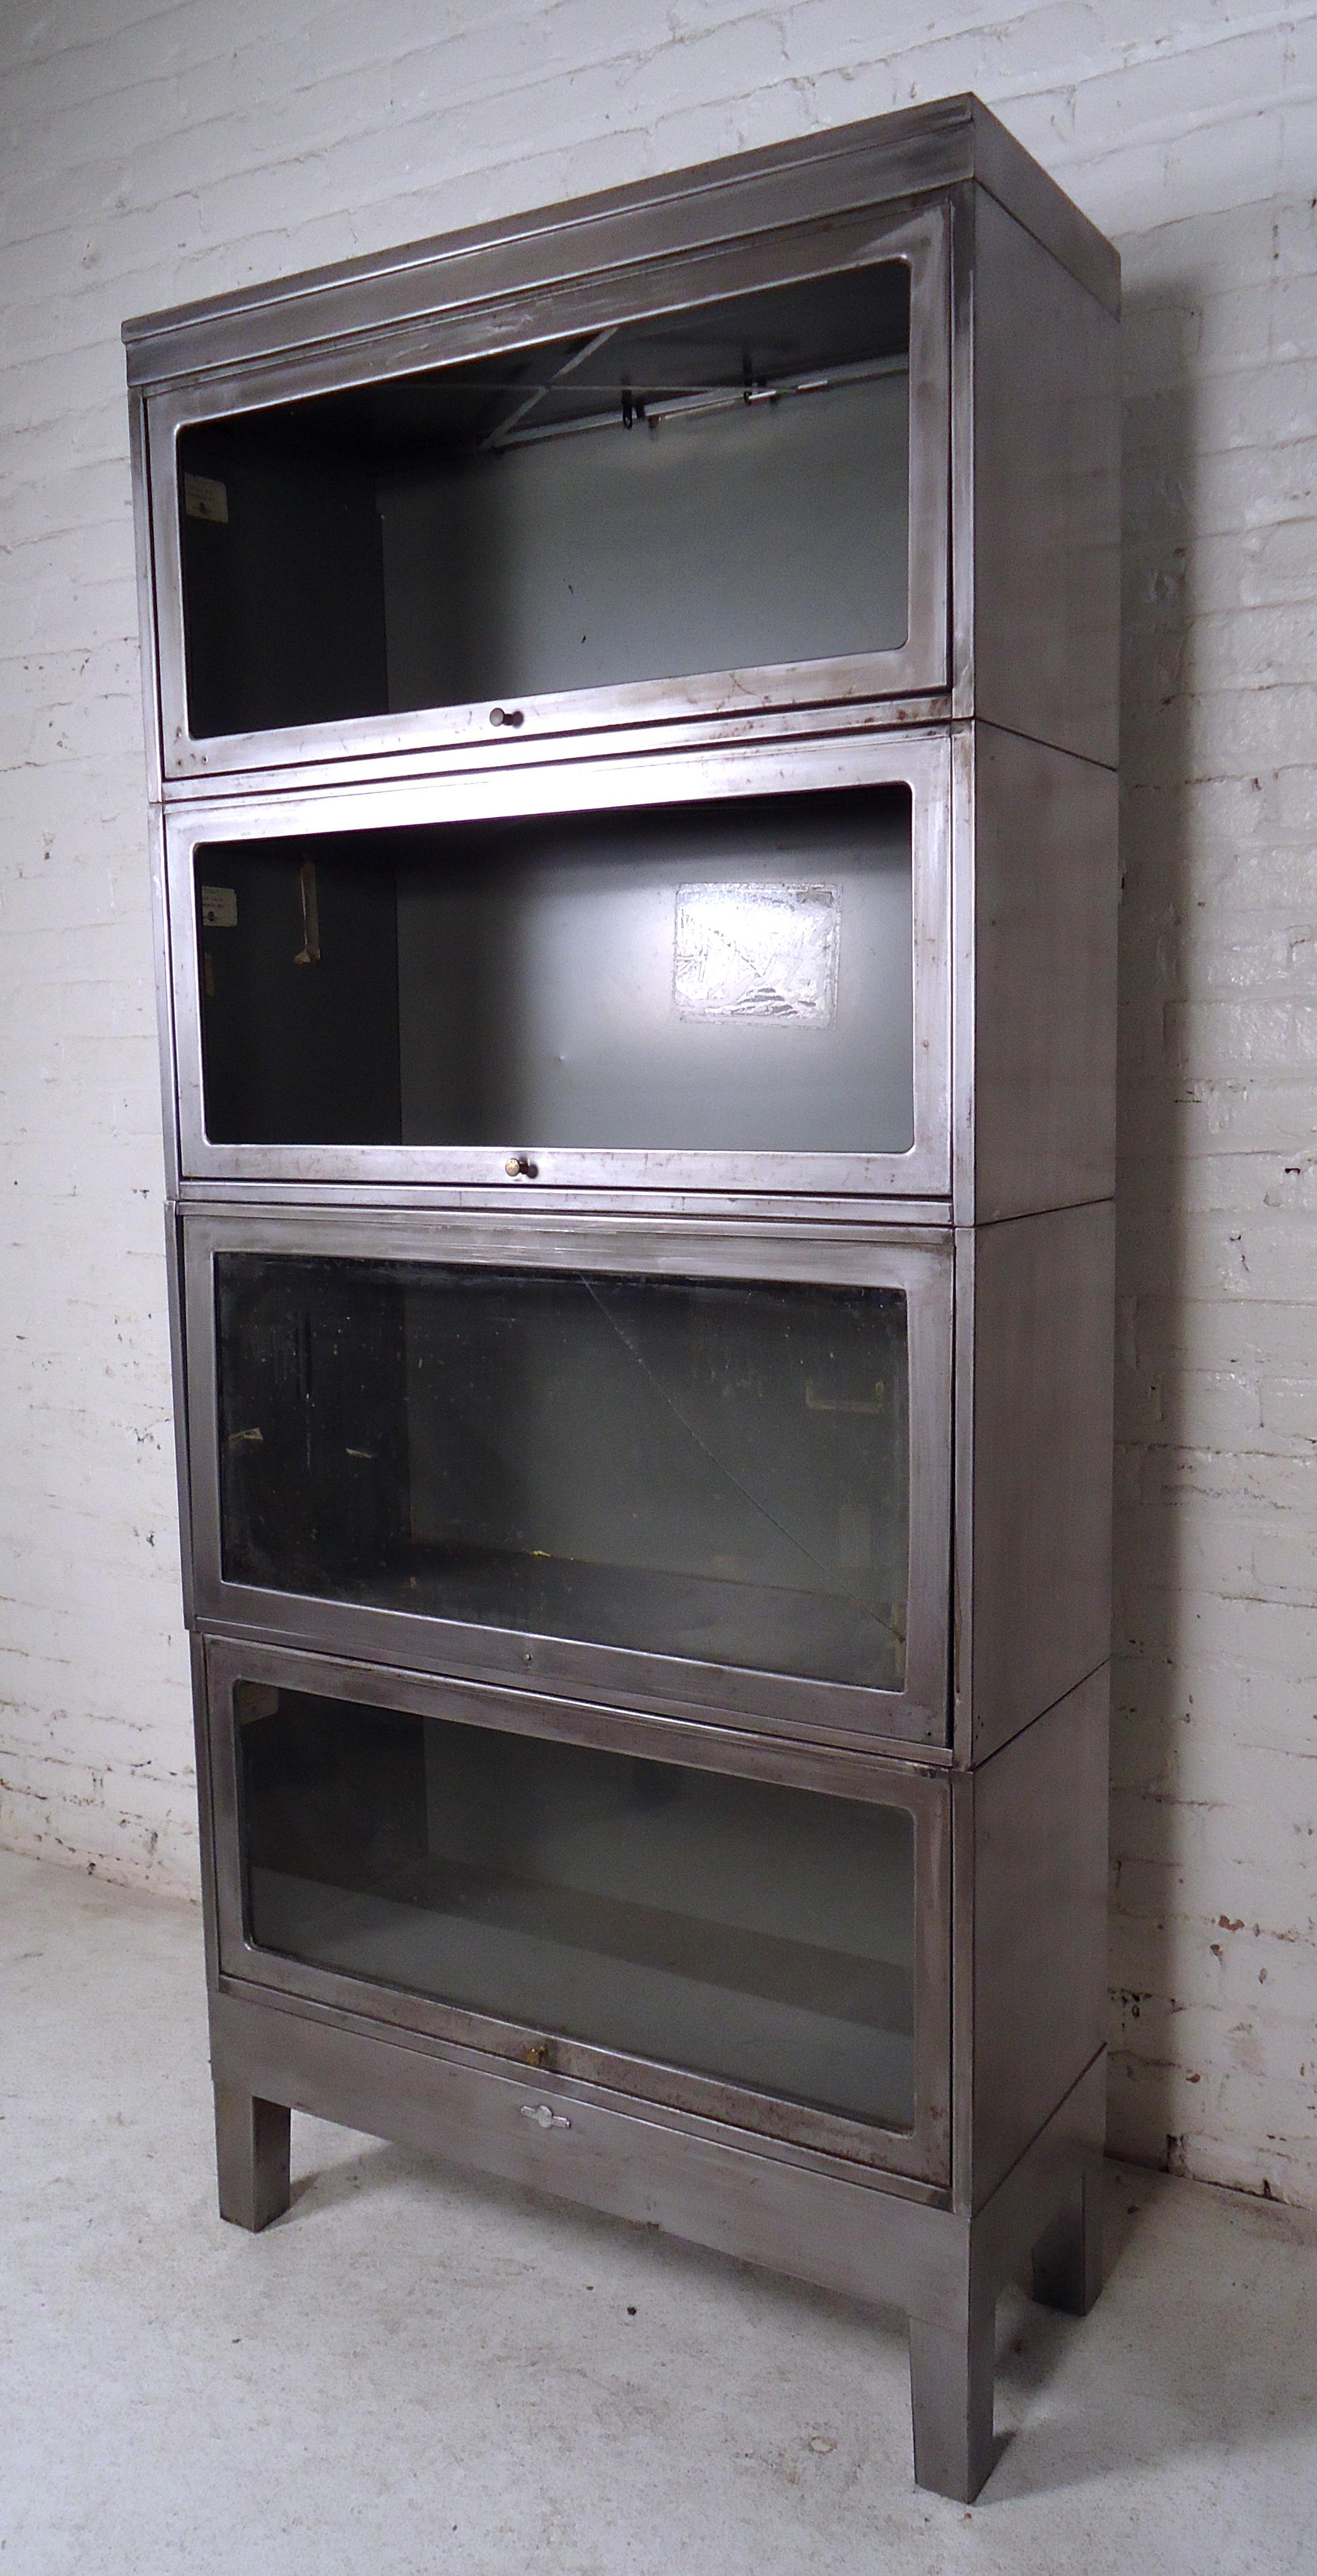 Vintage industrial metal four-stack bookcase features a glass front, round metal knobs and a sturdy metal detachable base. Recessing glass fronts that allow for dust free storage at home or in the office.
(Please confirm item location-NY or NJ,